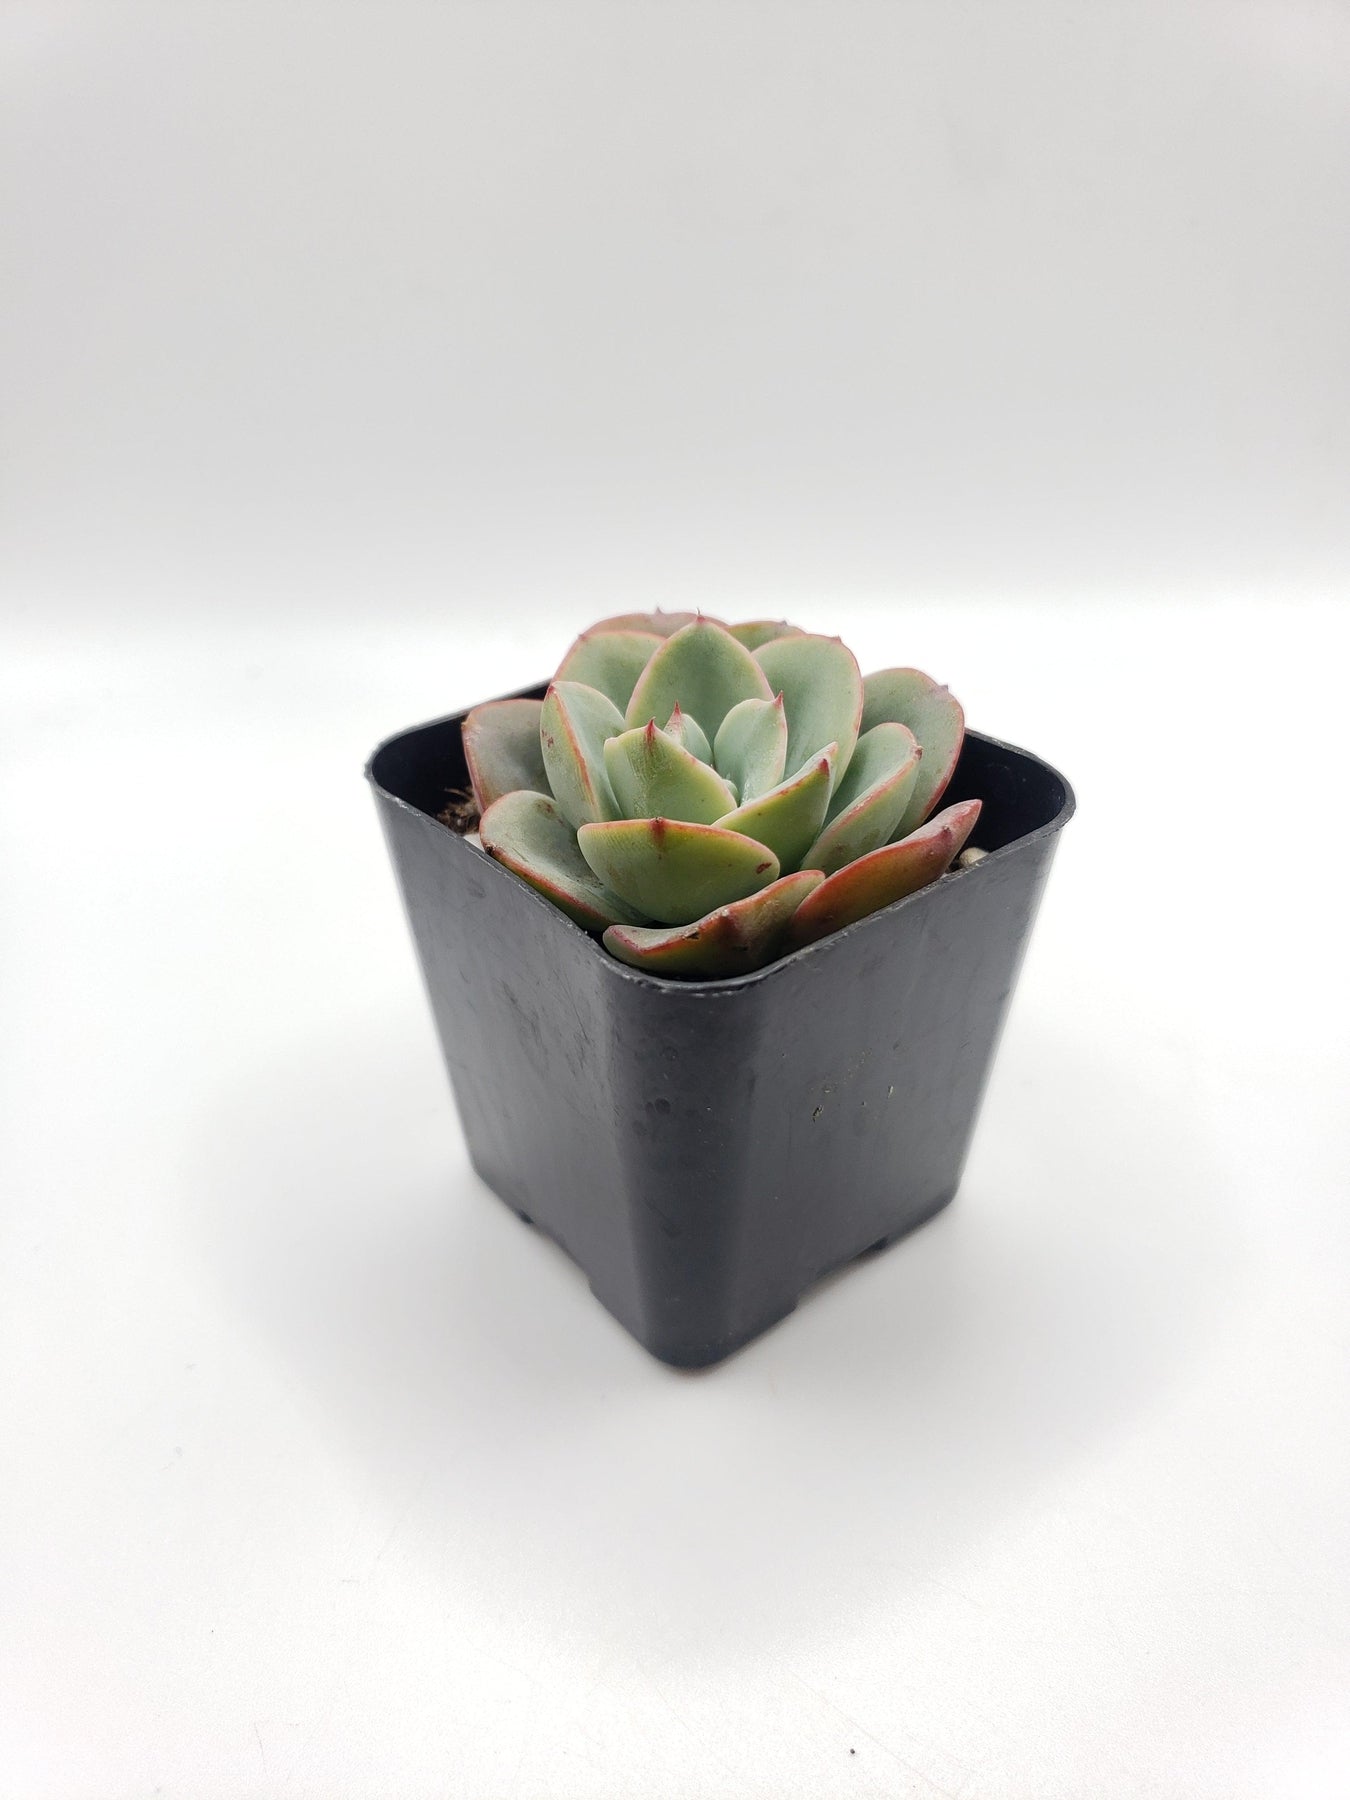 #24 Echeveria hybrid-Succulent - Small - Exact 2in Type-The Succulent Source